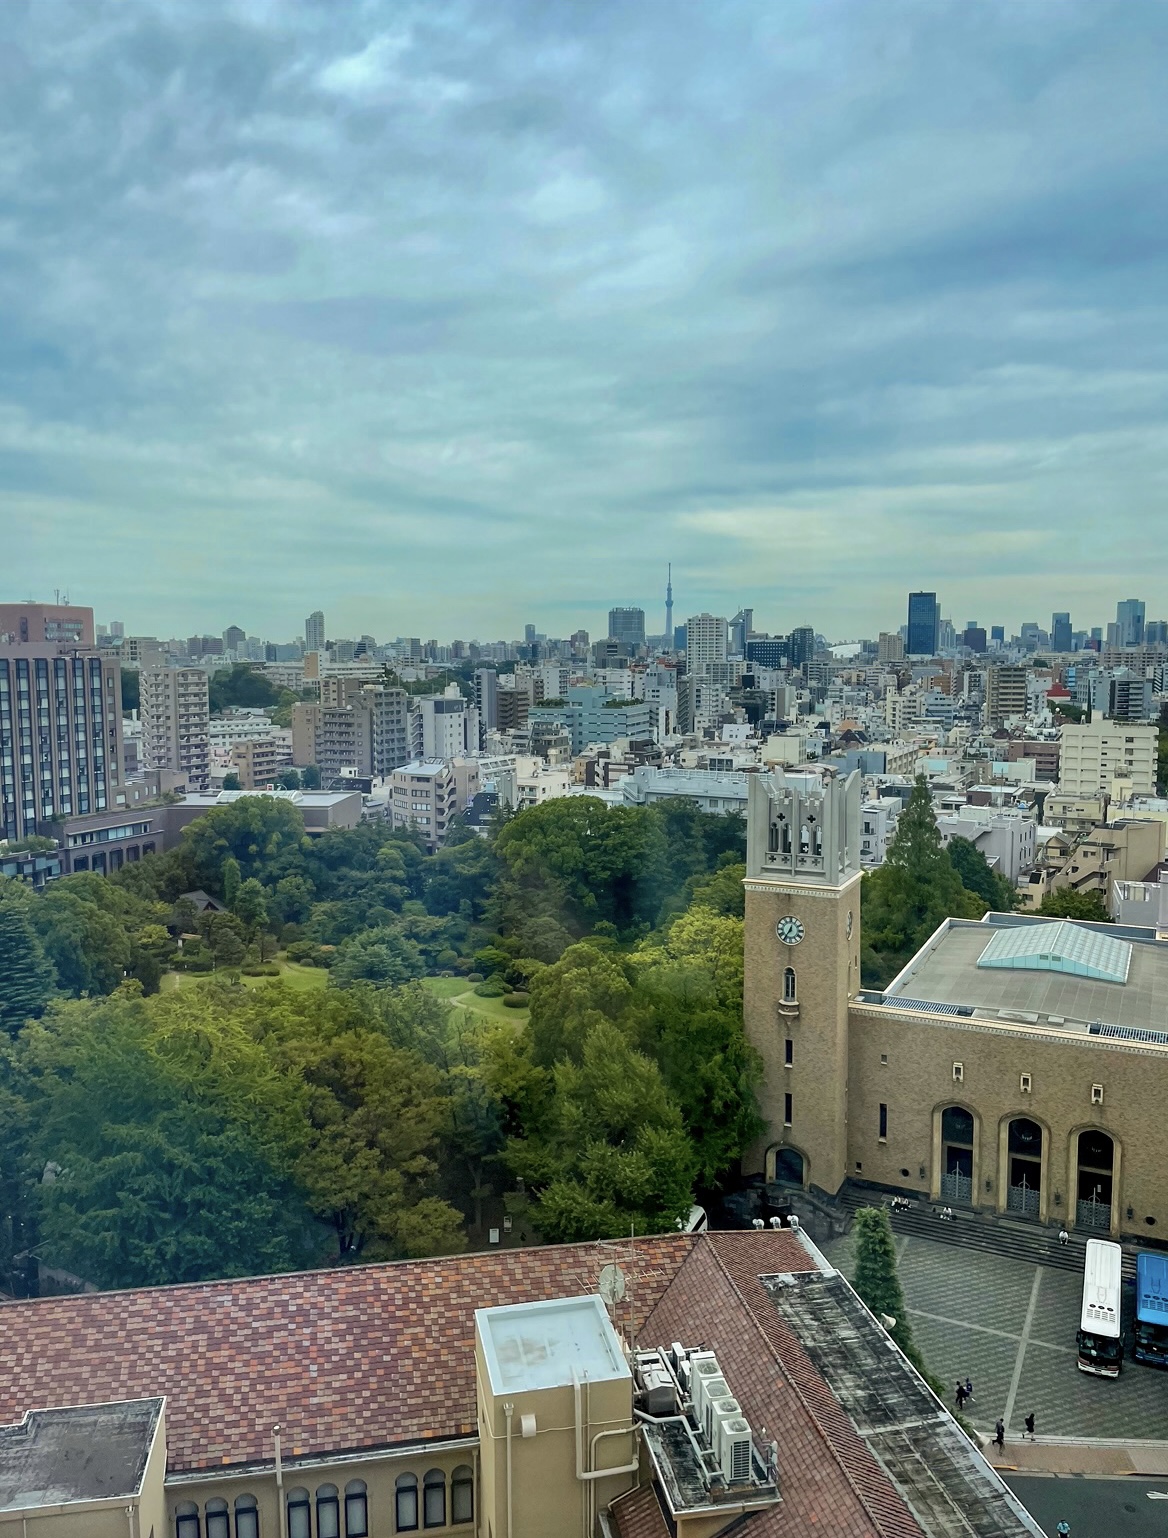 The view from a high floor in one of Waseda's buildings